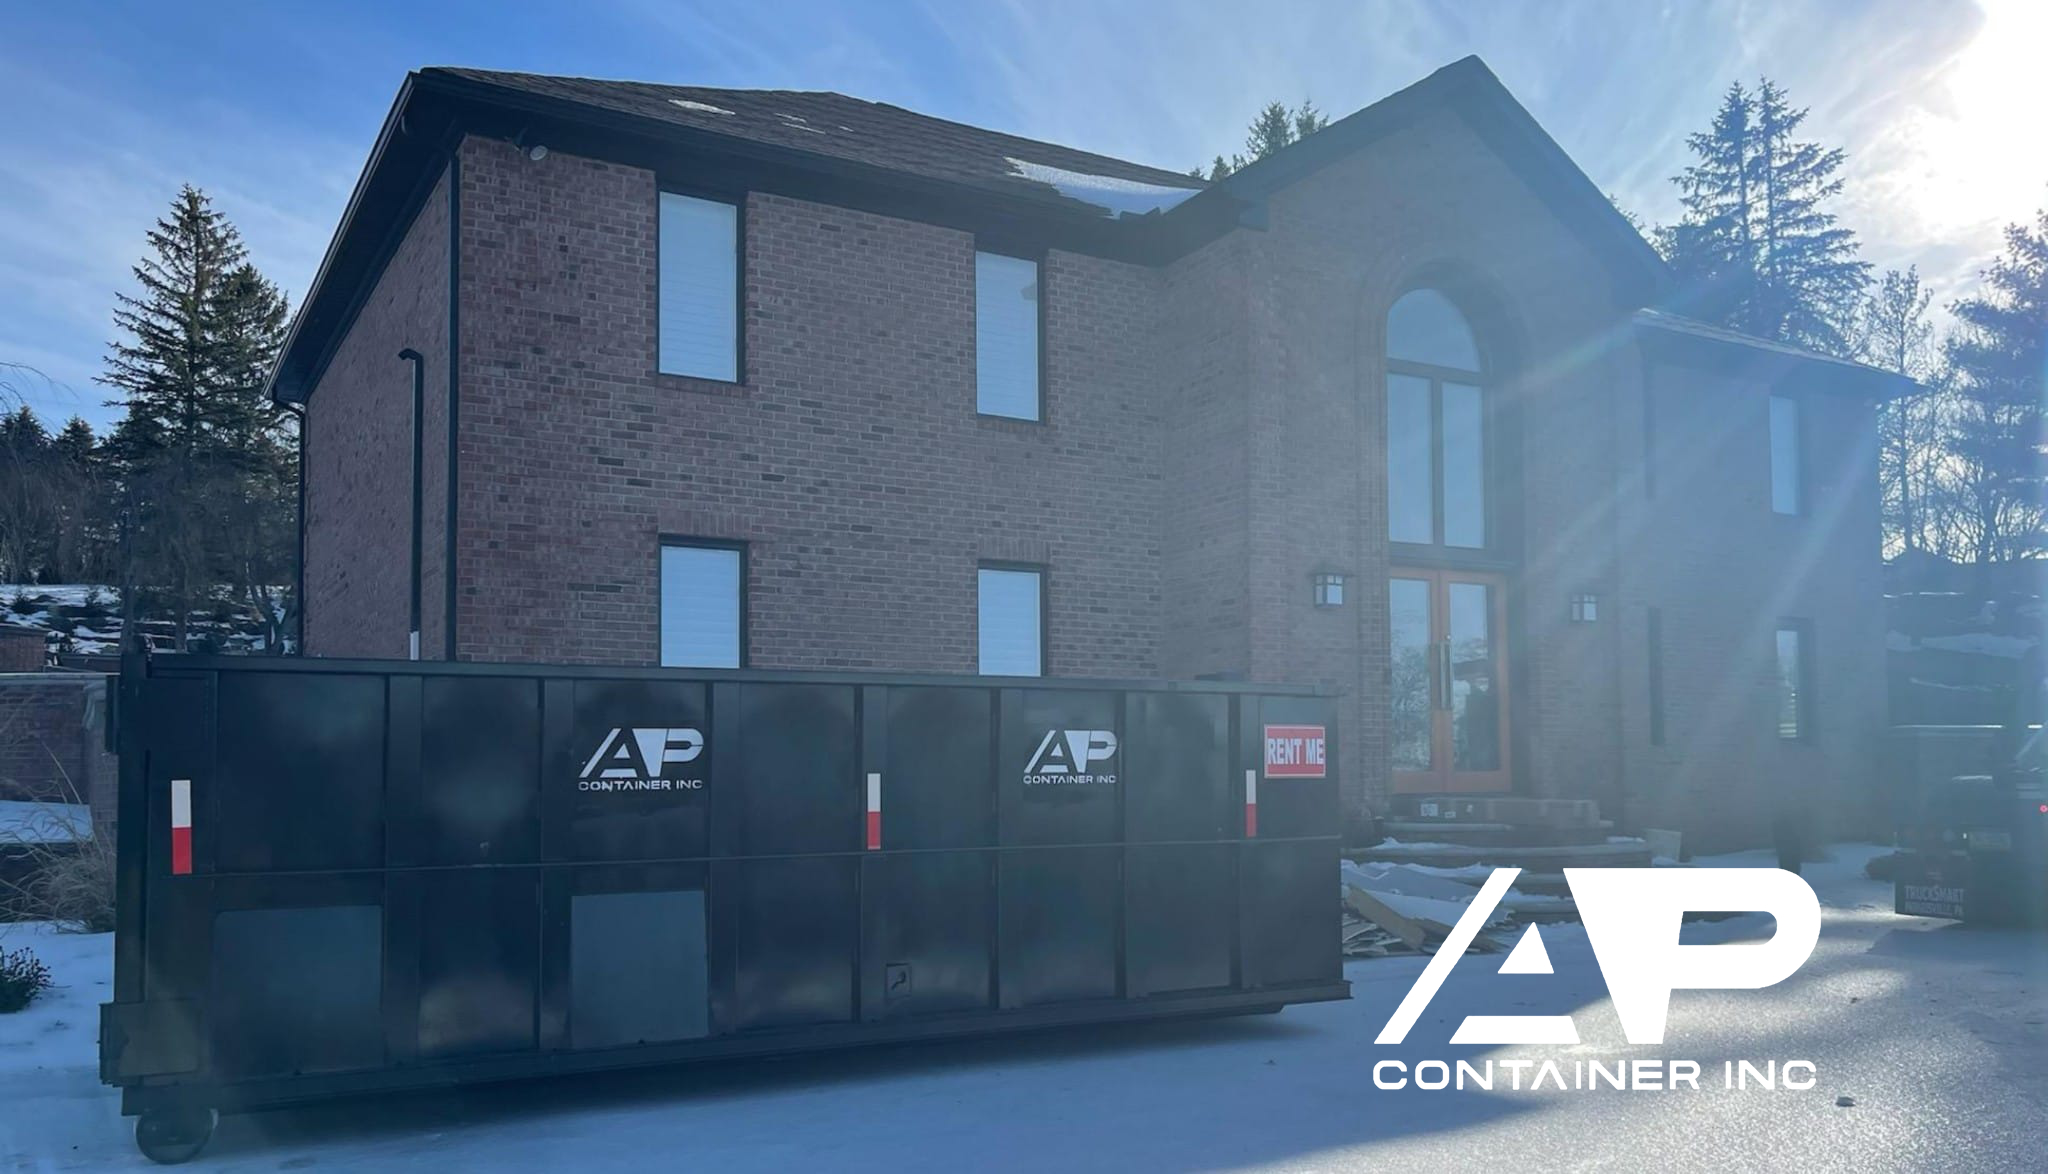 Residential Dumpster Rental AP Container Taylor PA